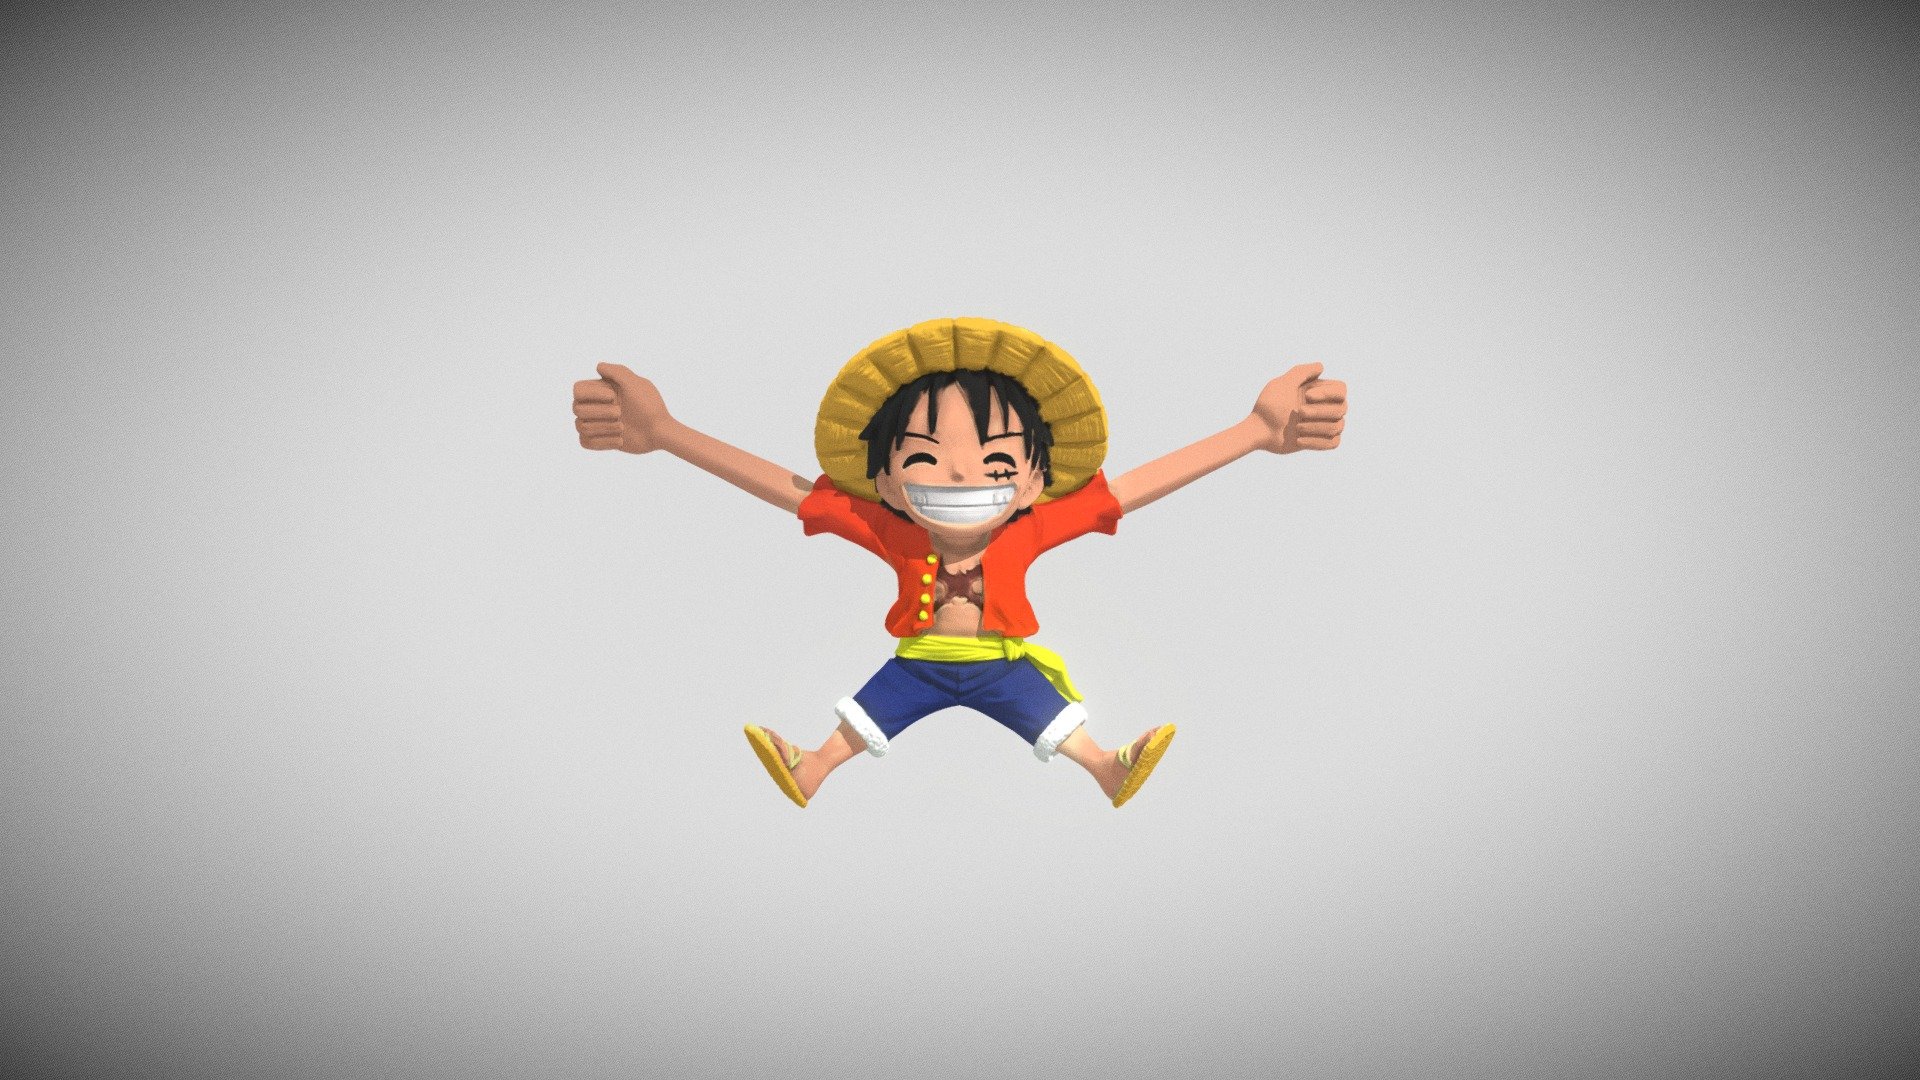 Textured Luffy for 3D color printing

Served as mask strap holder

Printed Sample: https://www.instagram.com/p/CEoiazggnDR/ - Luffy - Buy Royalty Free 3D model by Marco.Chow 3d model